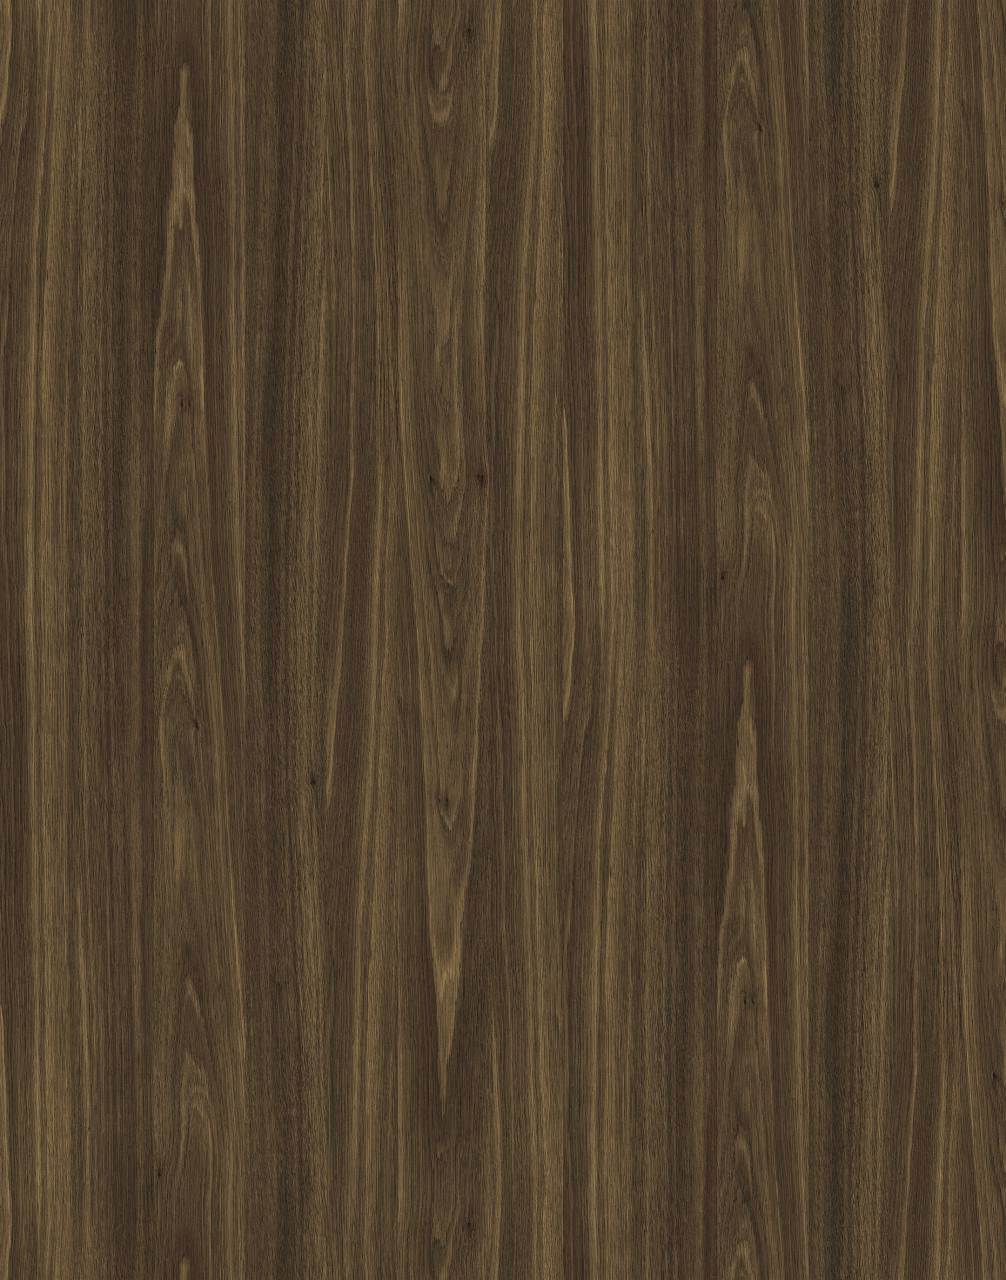 Bourbon Oak PW HPL with textured surface and warm medium brown tones for a rich and inviting look.